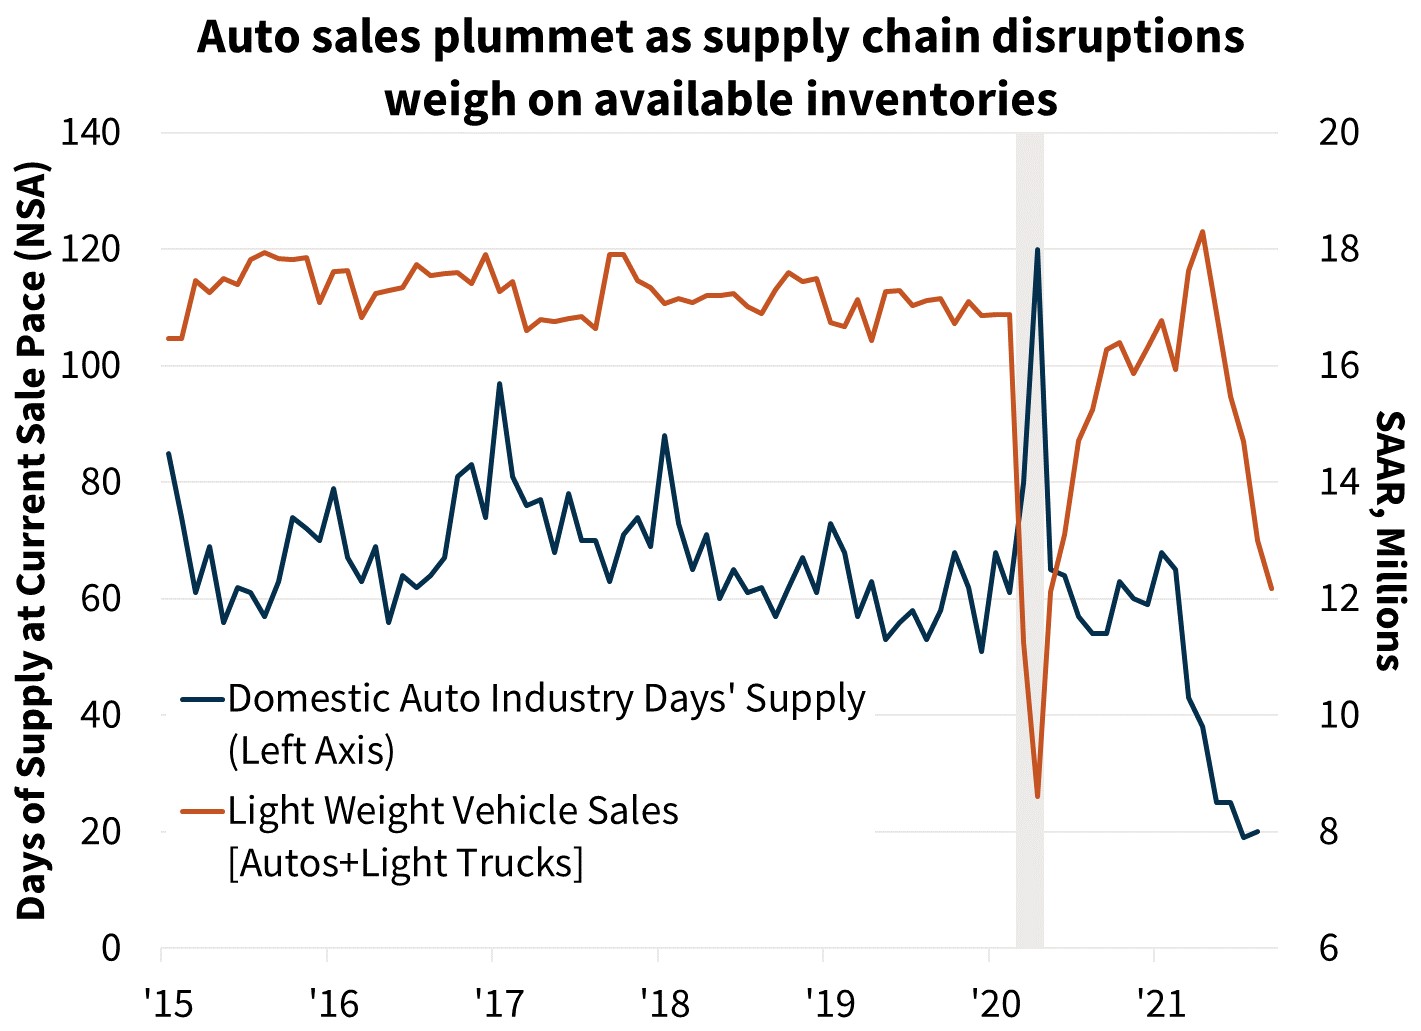  Auto sales plummet as supply chain disruptions weigh on available inventories 